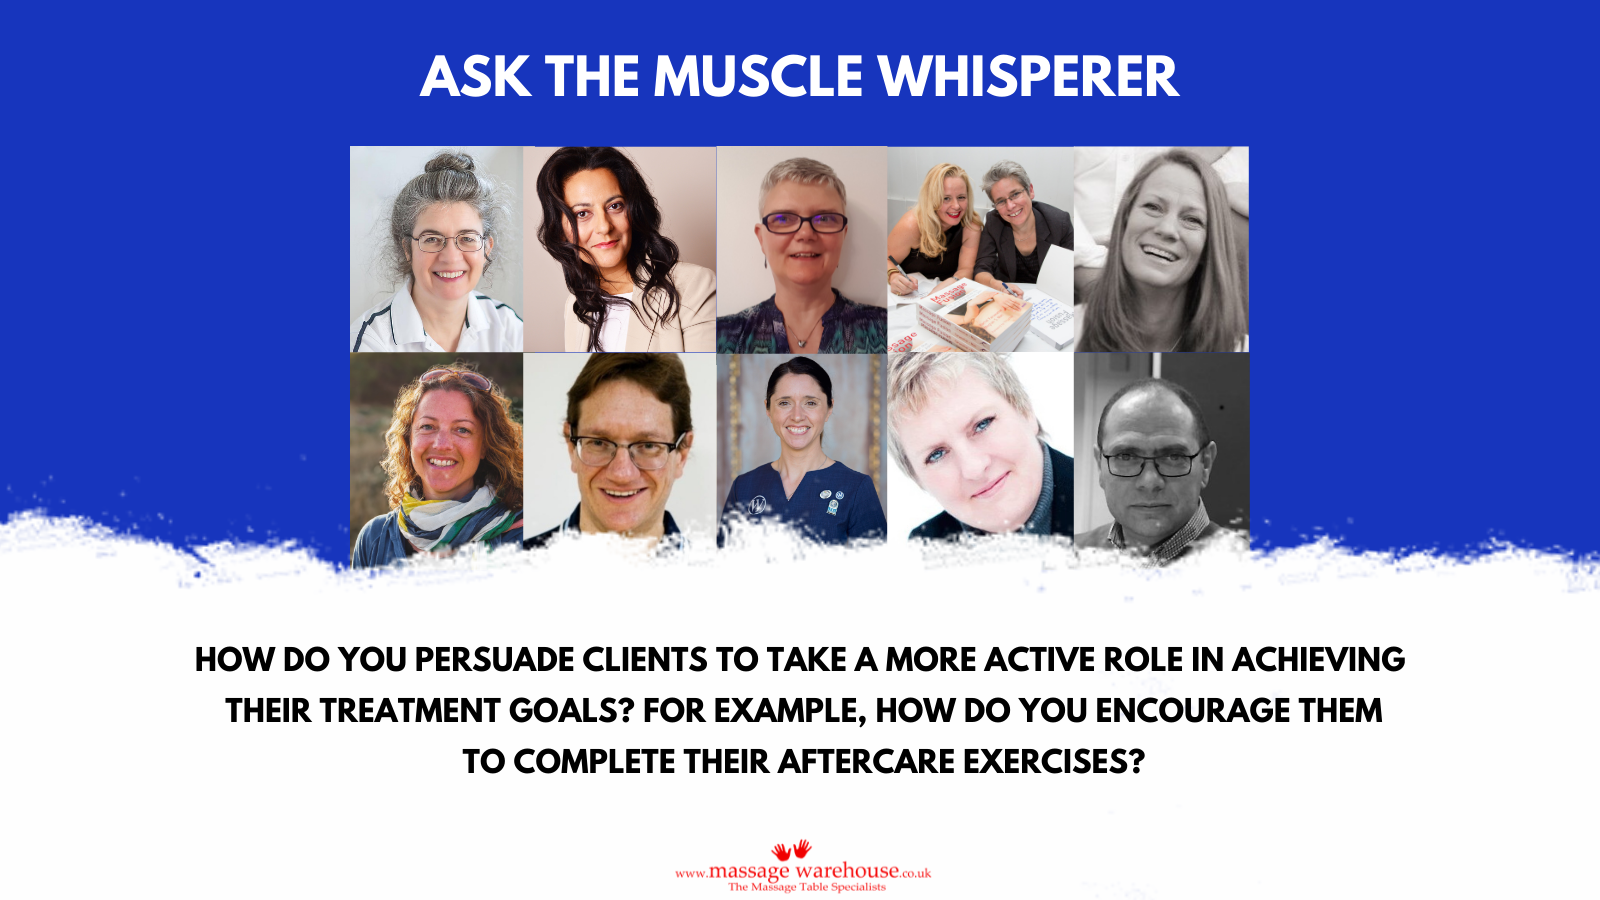 How can massage therapists convince clients to take a more active role in achieving their treatment goals? Ask the Muscle Whisperer Series